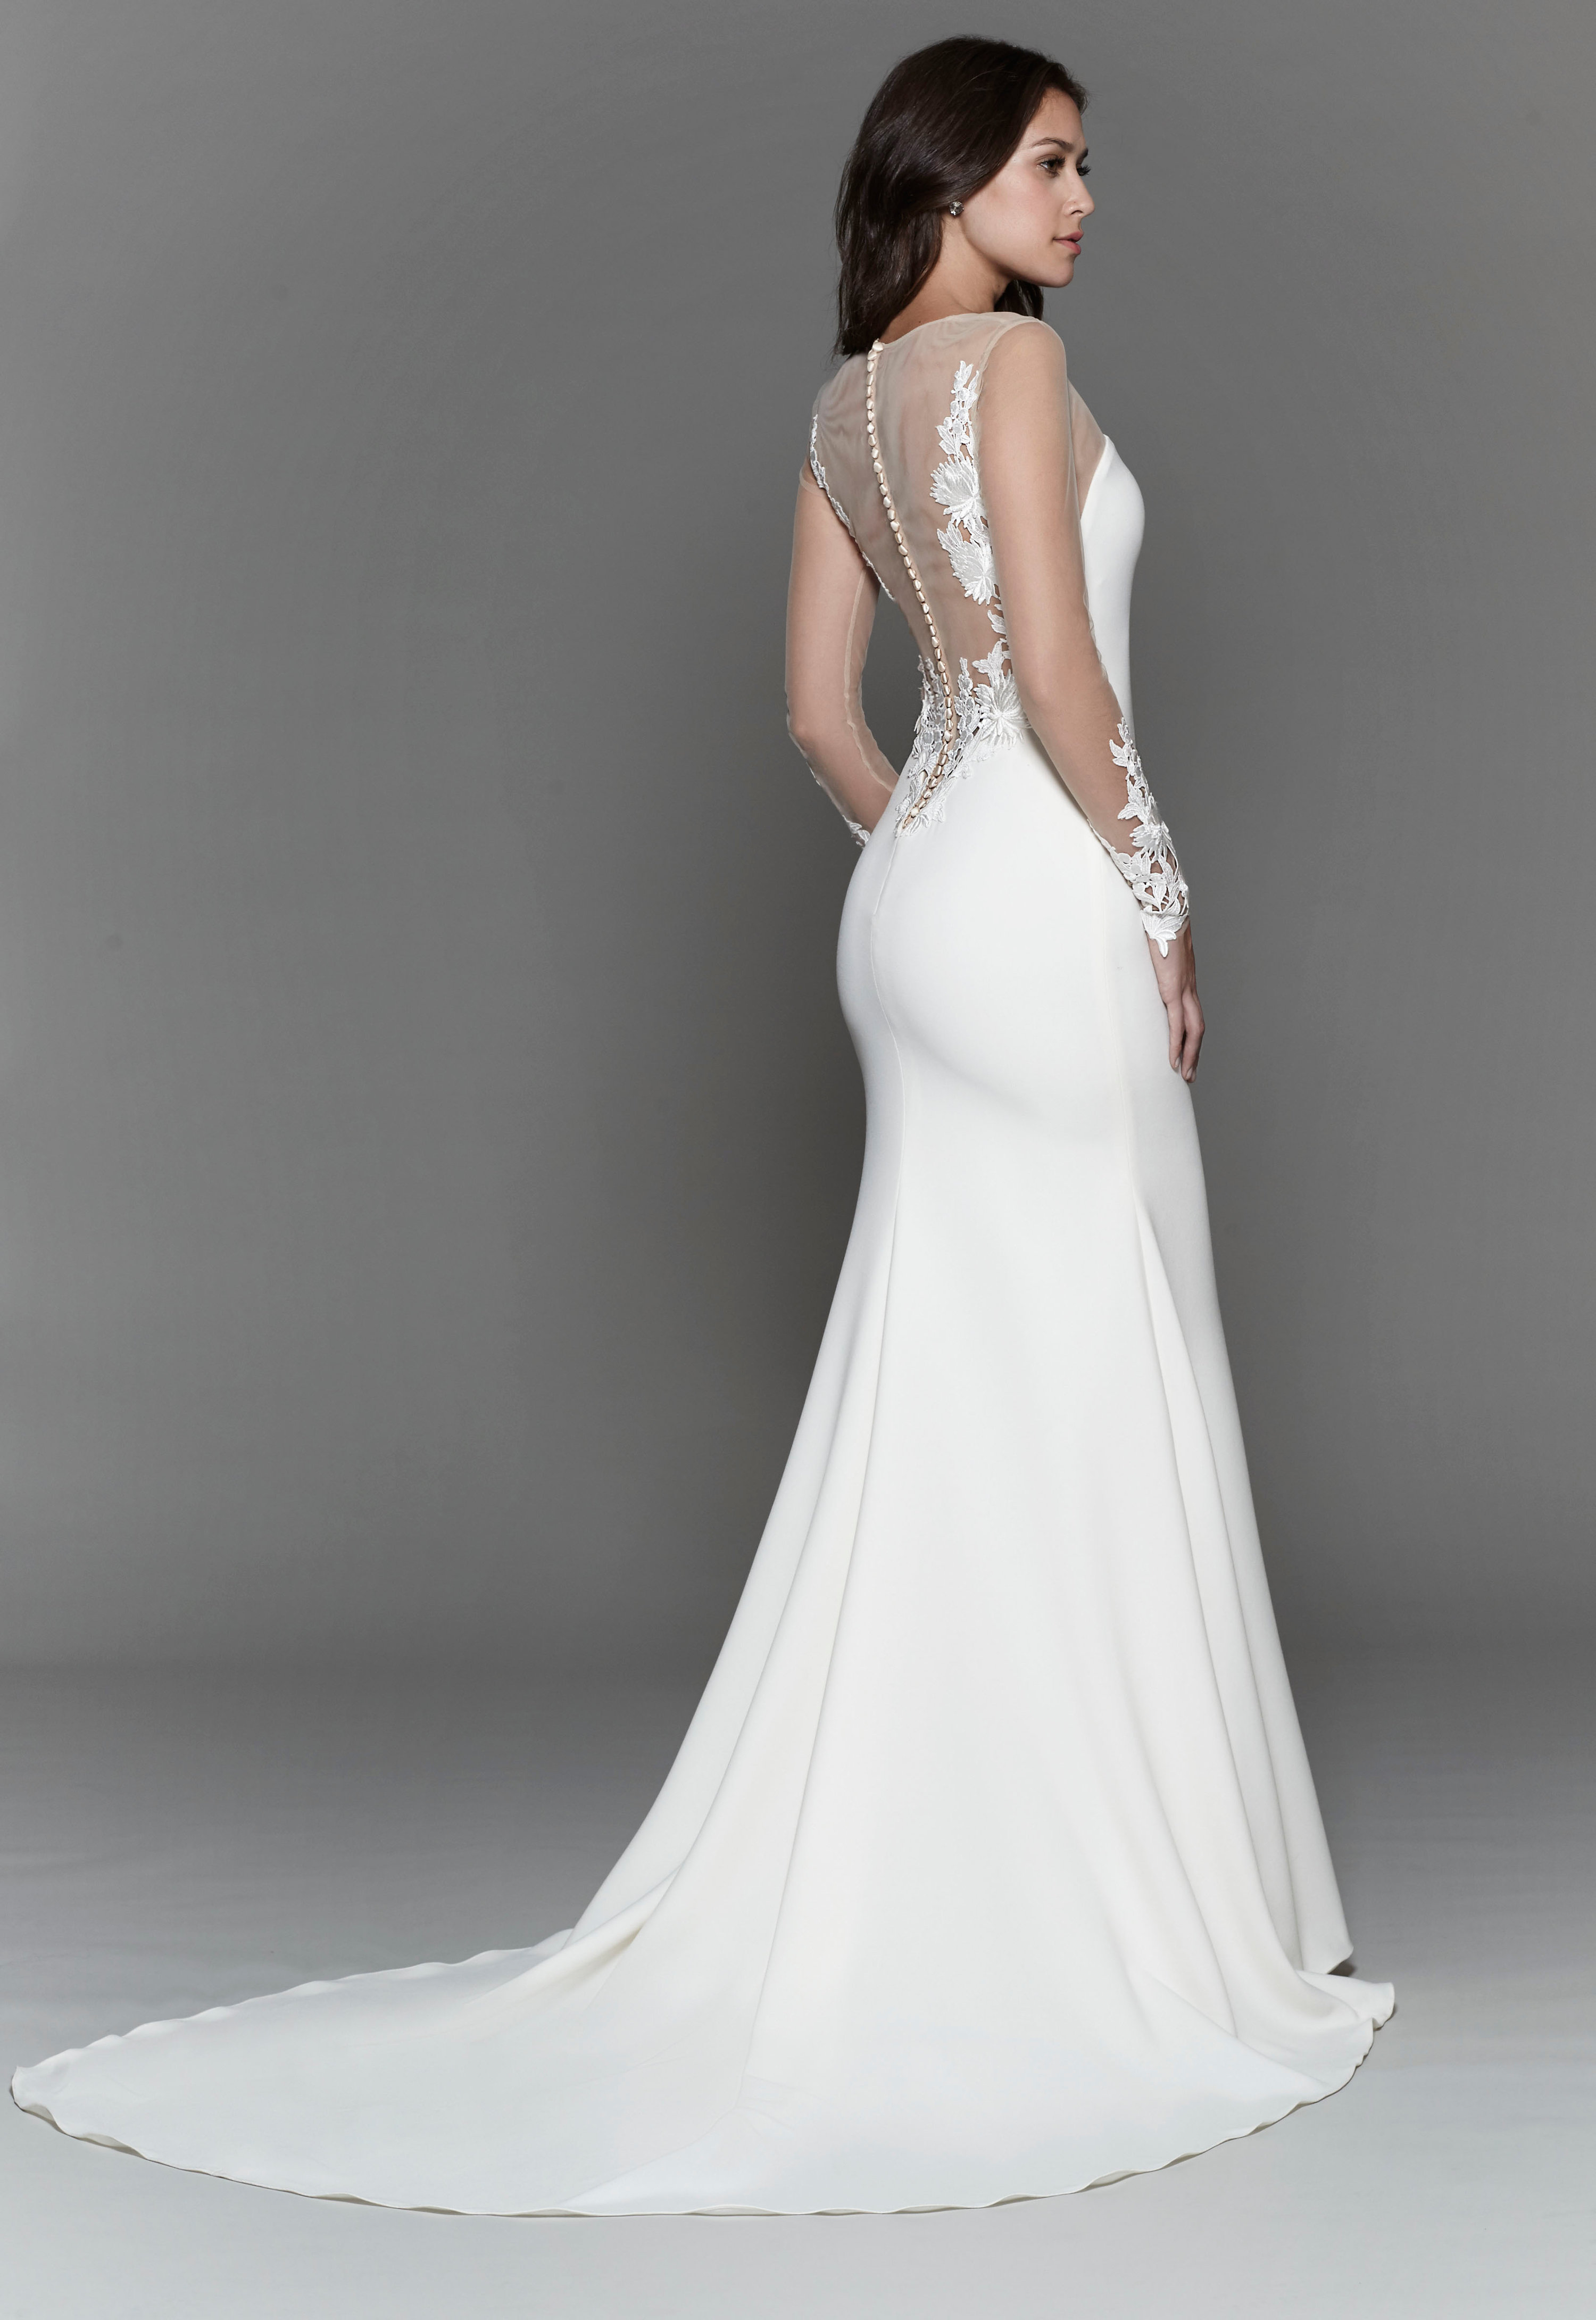 Bridal Gowns and Wedding Dresses by JLM Couture - Style 2712